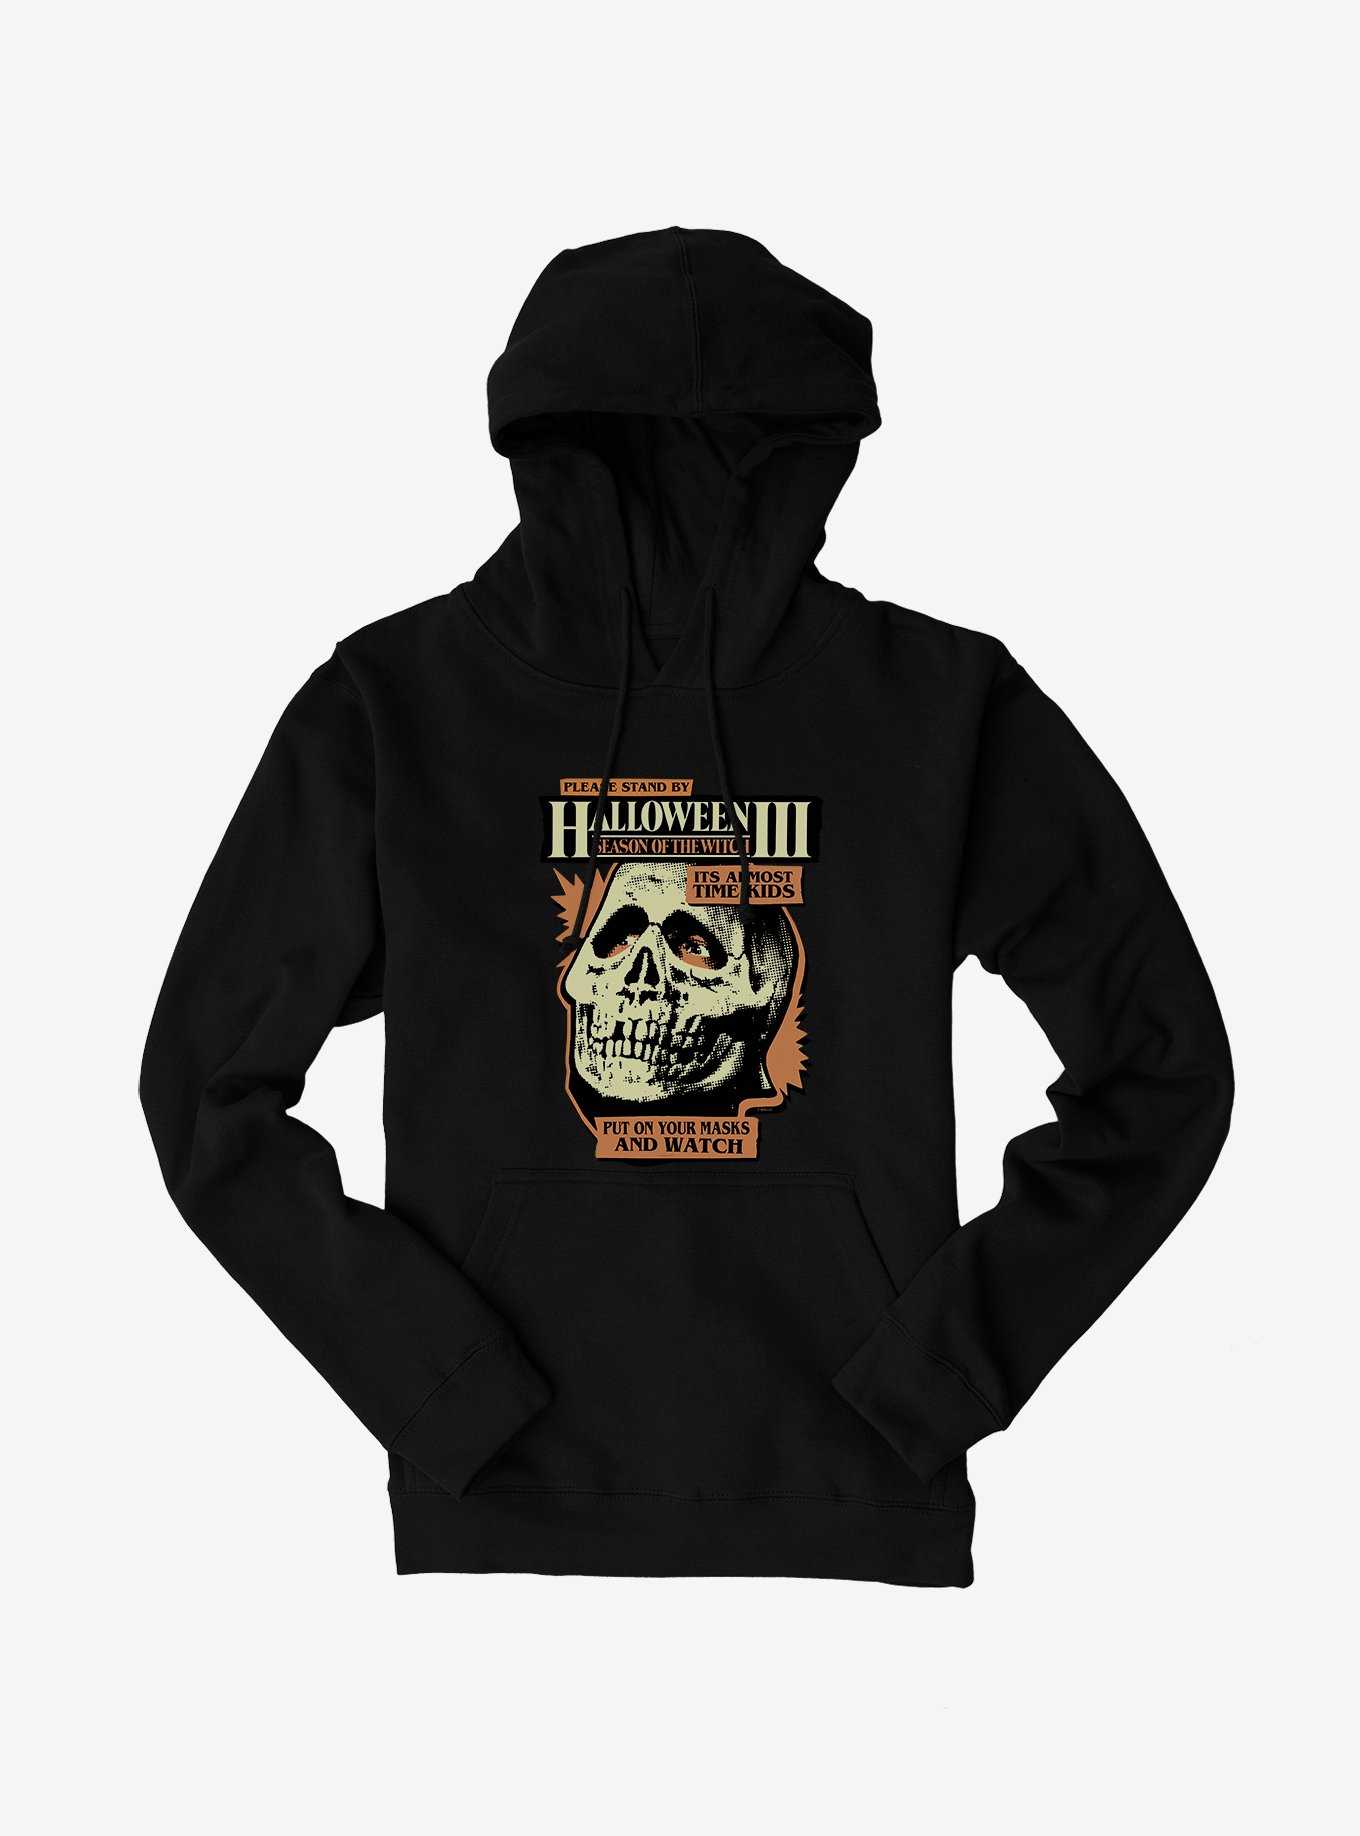 Halloween III: Season Of The Witch Please Stand By Hoodie, , hi-res